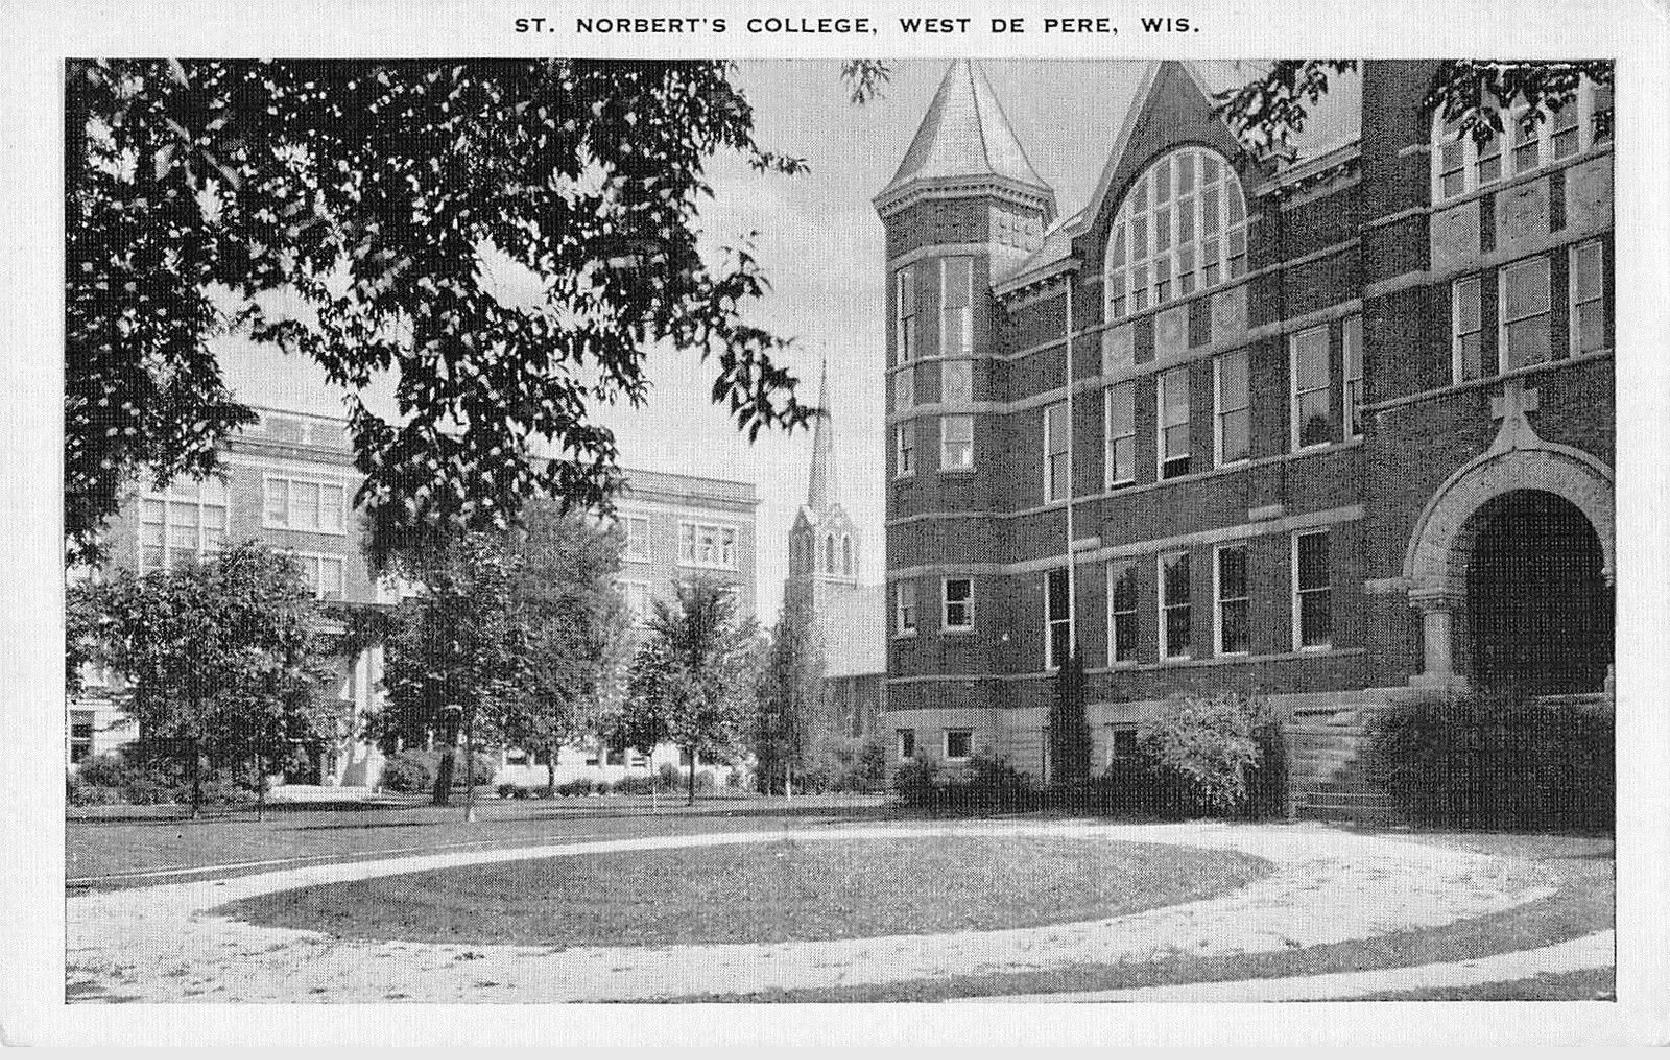 St. Norbert's College • UNKNOWN YEAR